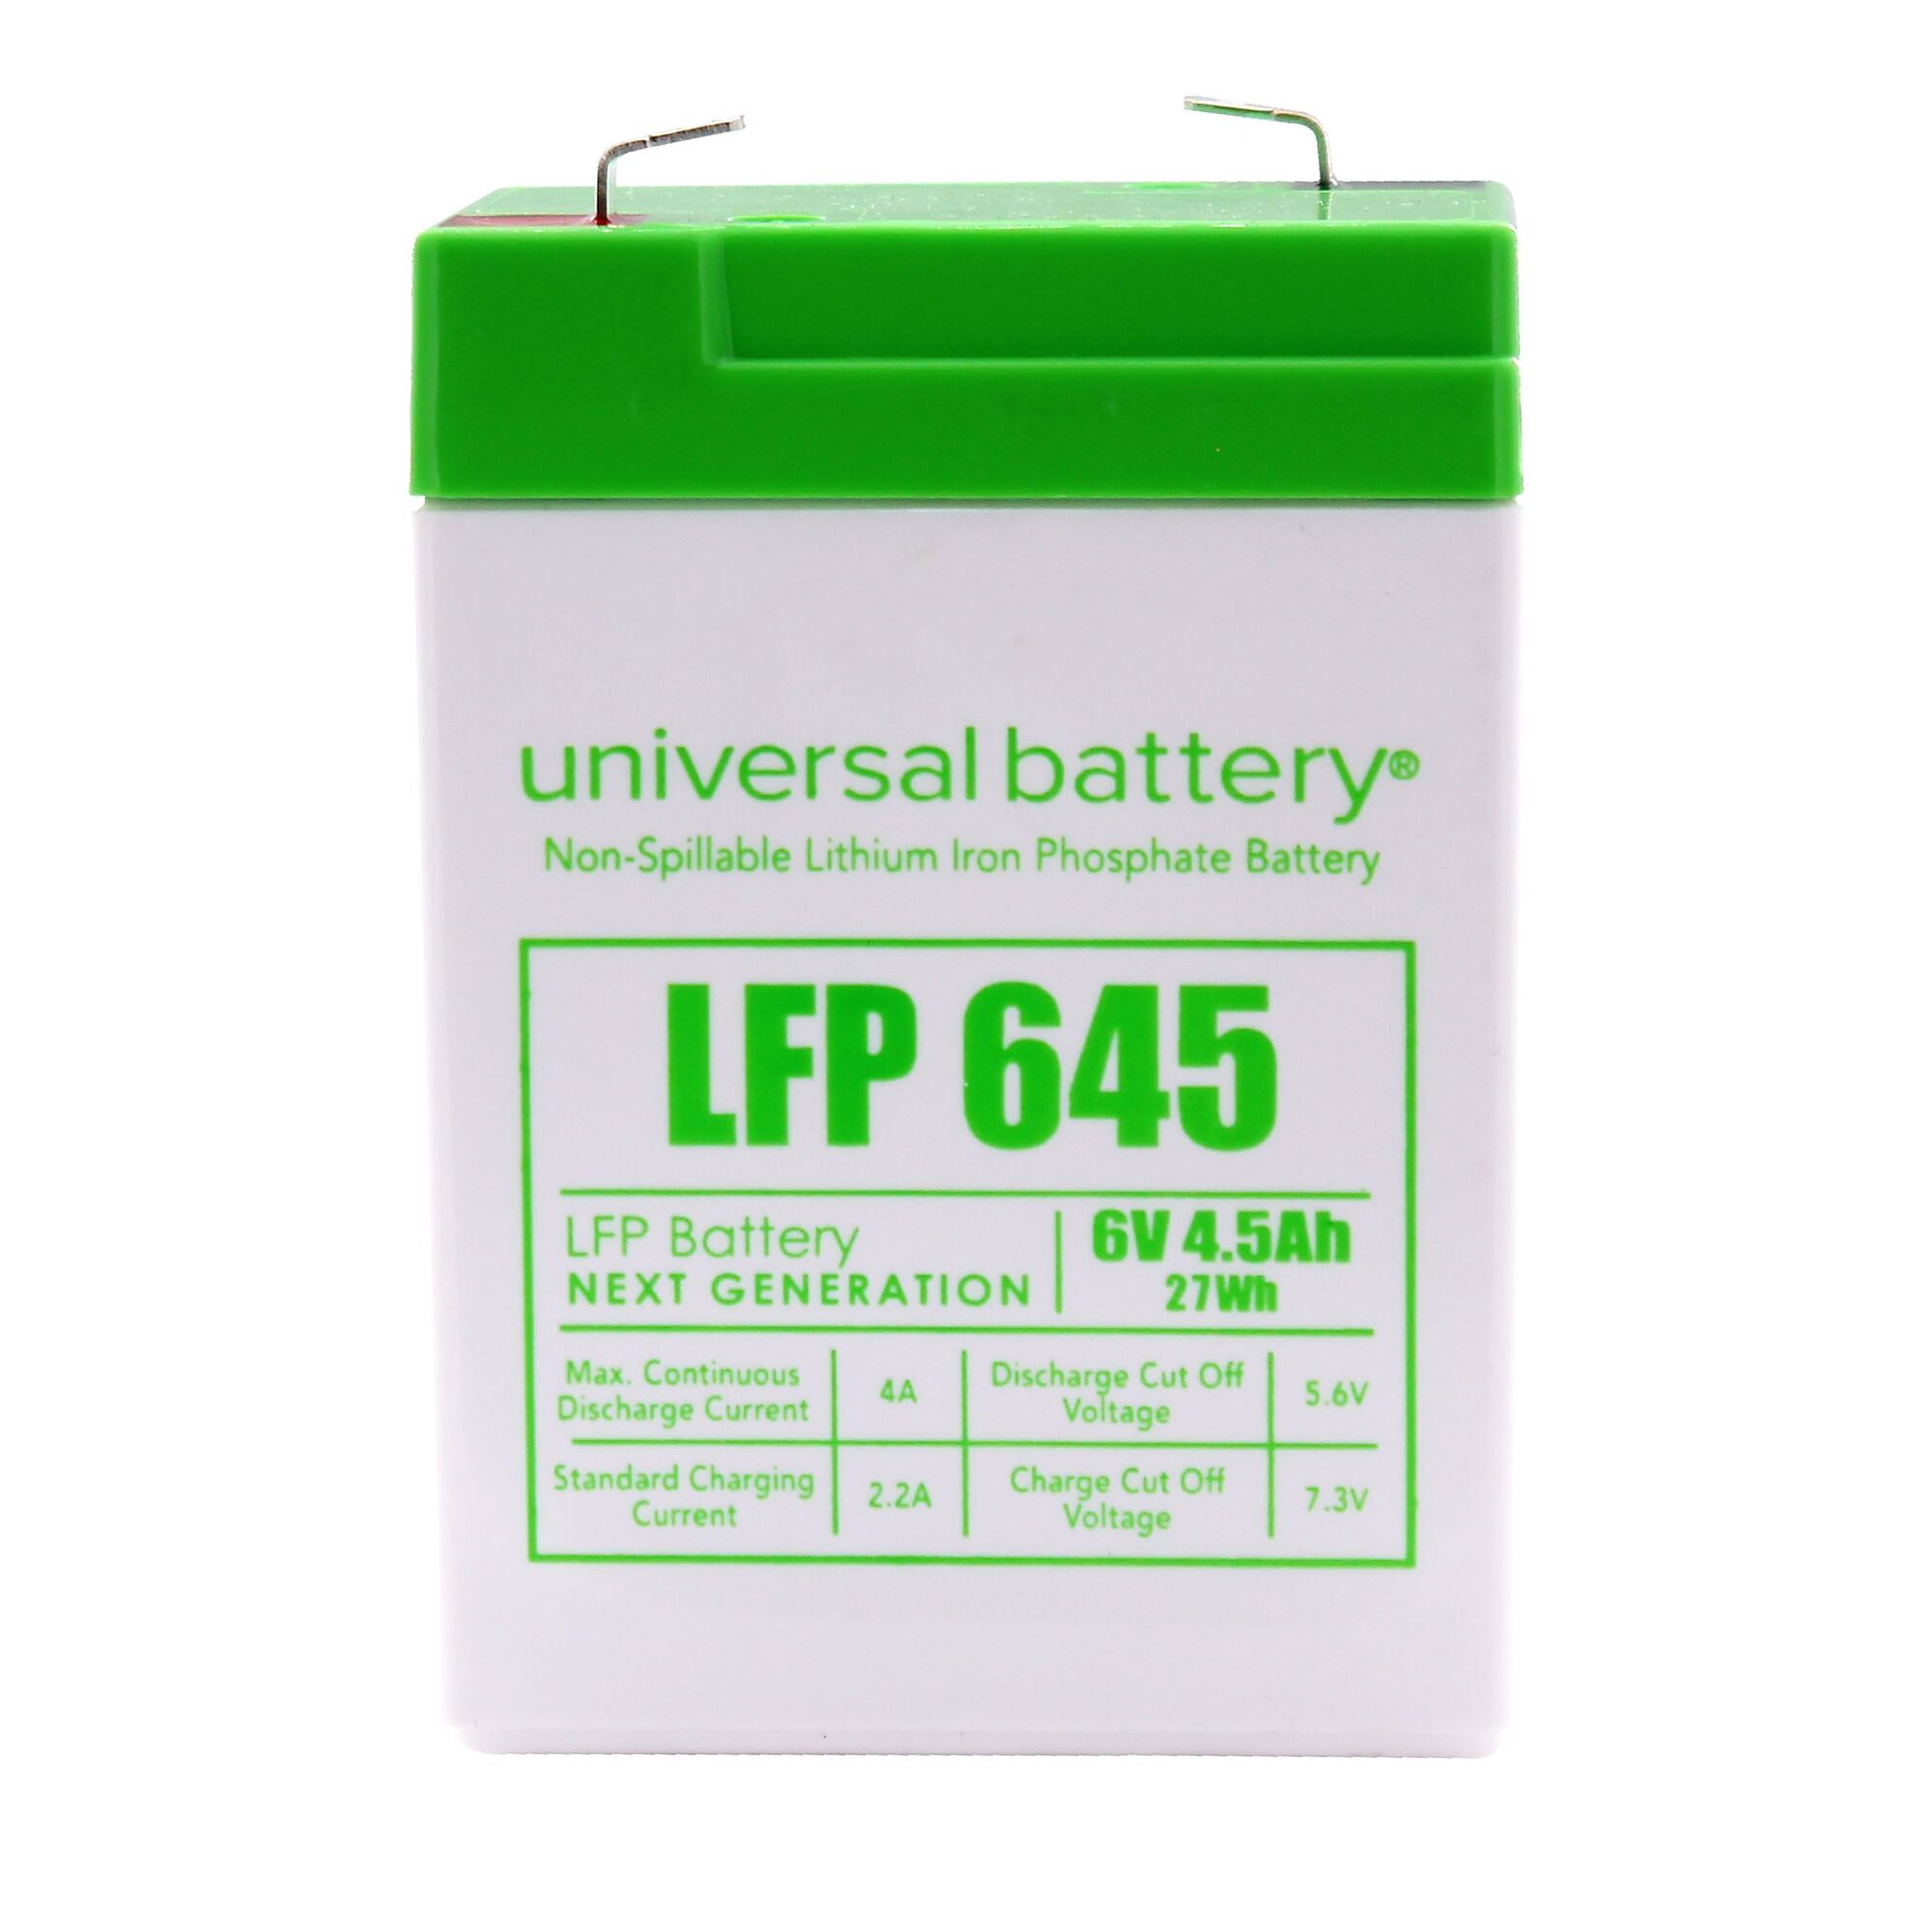 UPG, 6V 4.5Ah F2 LFP Battery, Volts 6 Amp Hours 4.5 Battery Power Type Lithium, Model 48046